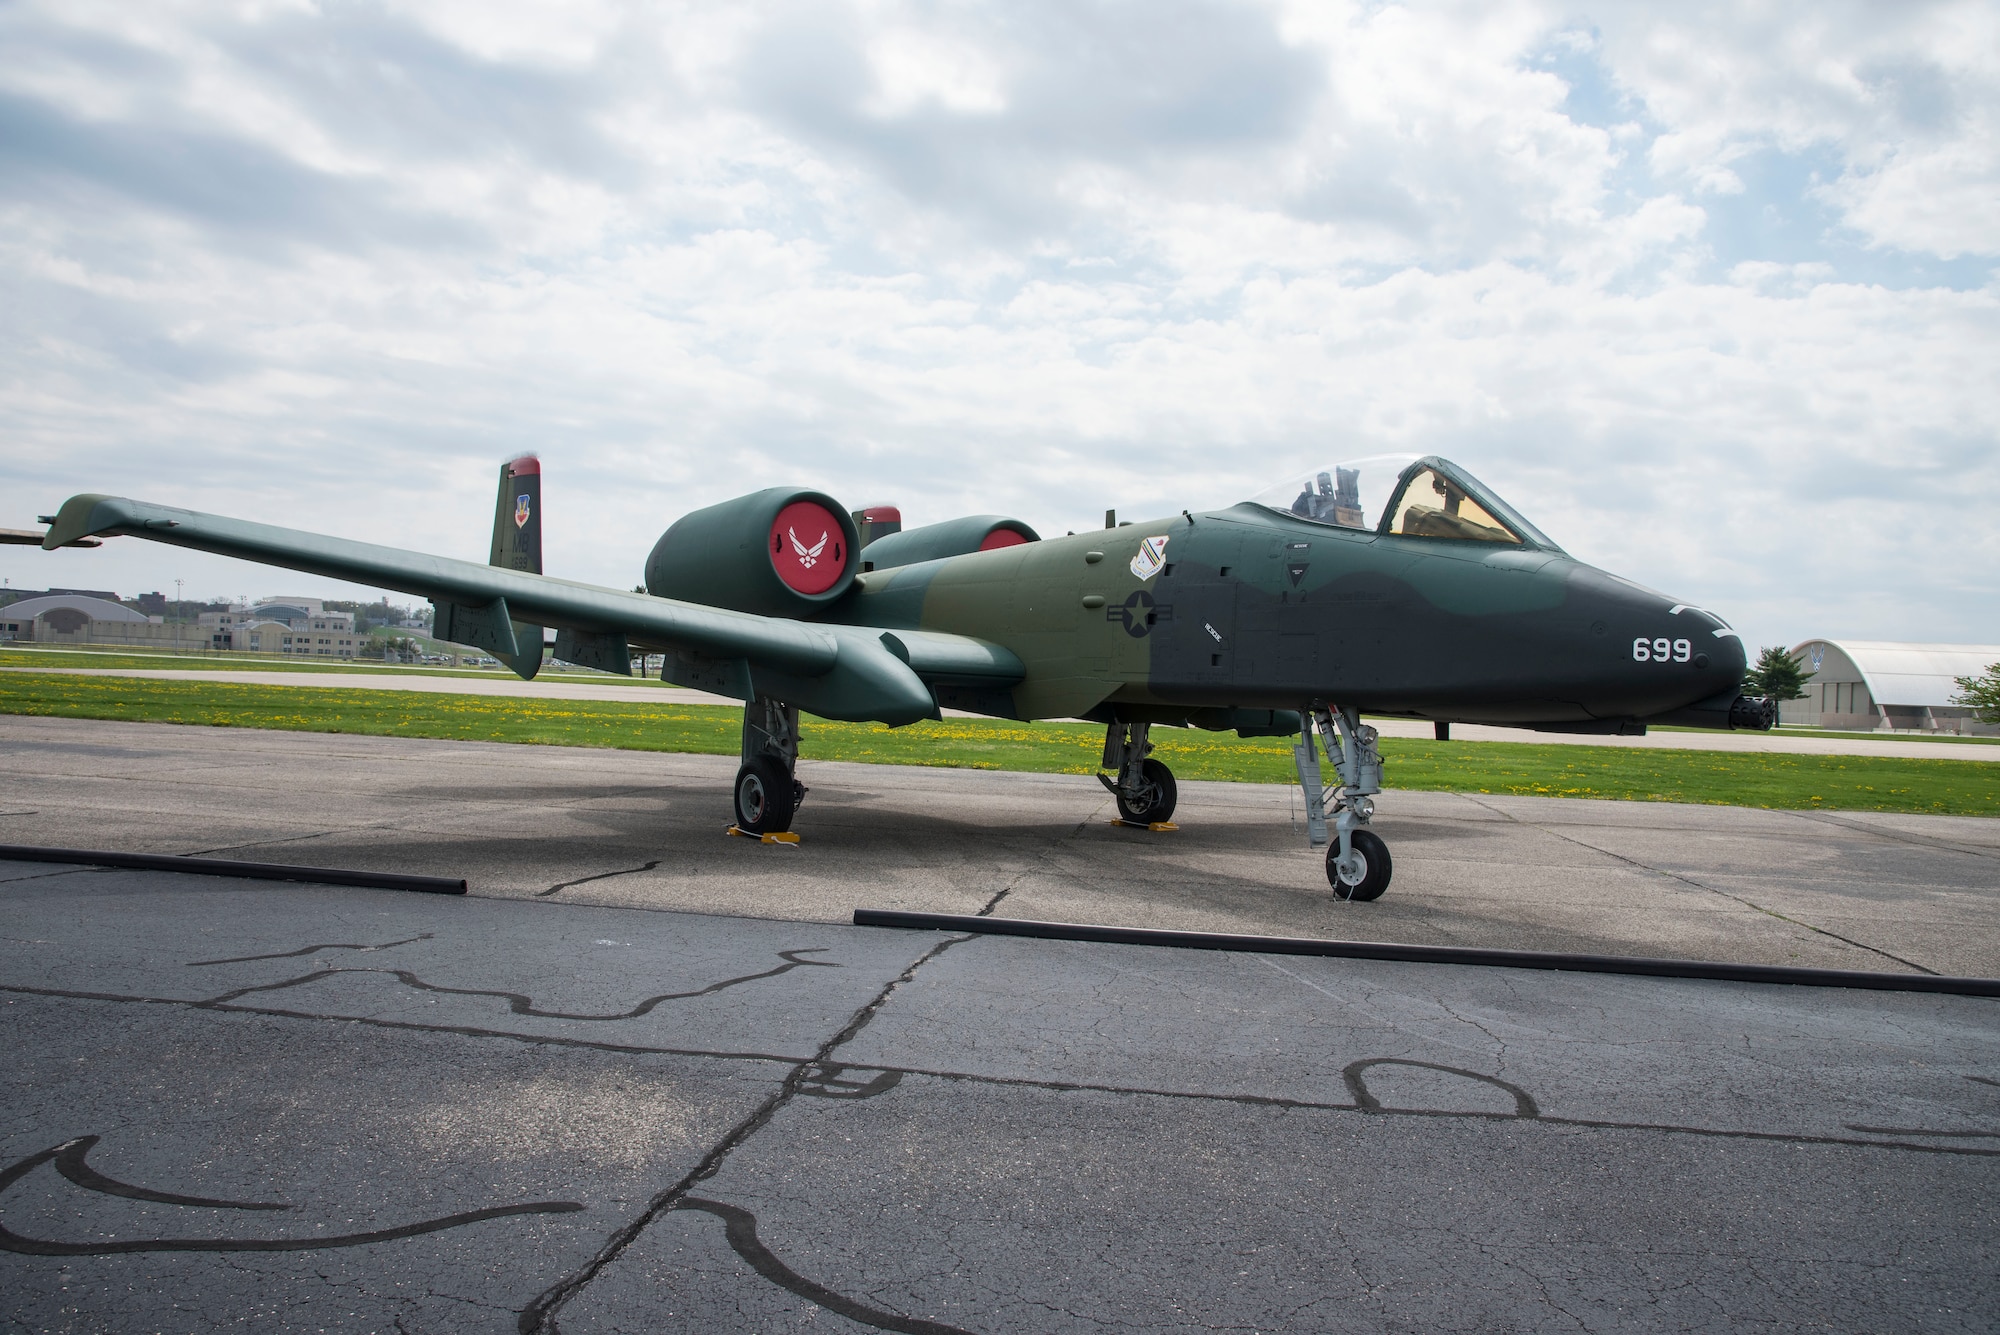 DAYTON, Ohio -- Fairchild Republic A-10A Thunderbolt II on display in the Air Park at the National Museum of the United States Air Force. (U.S. Air Force photo by Ken LaRock)